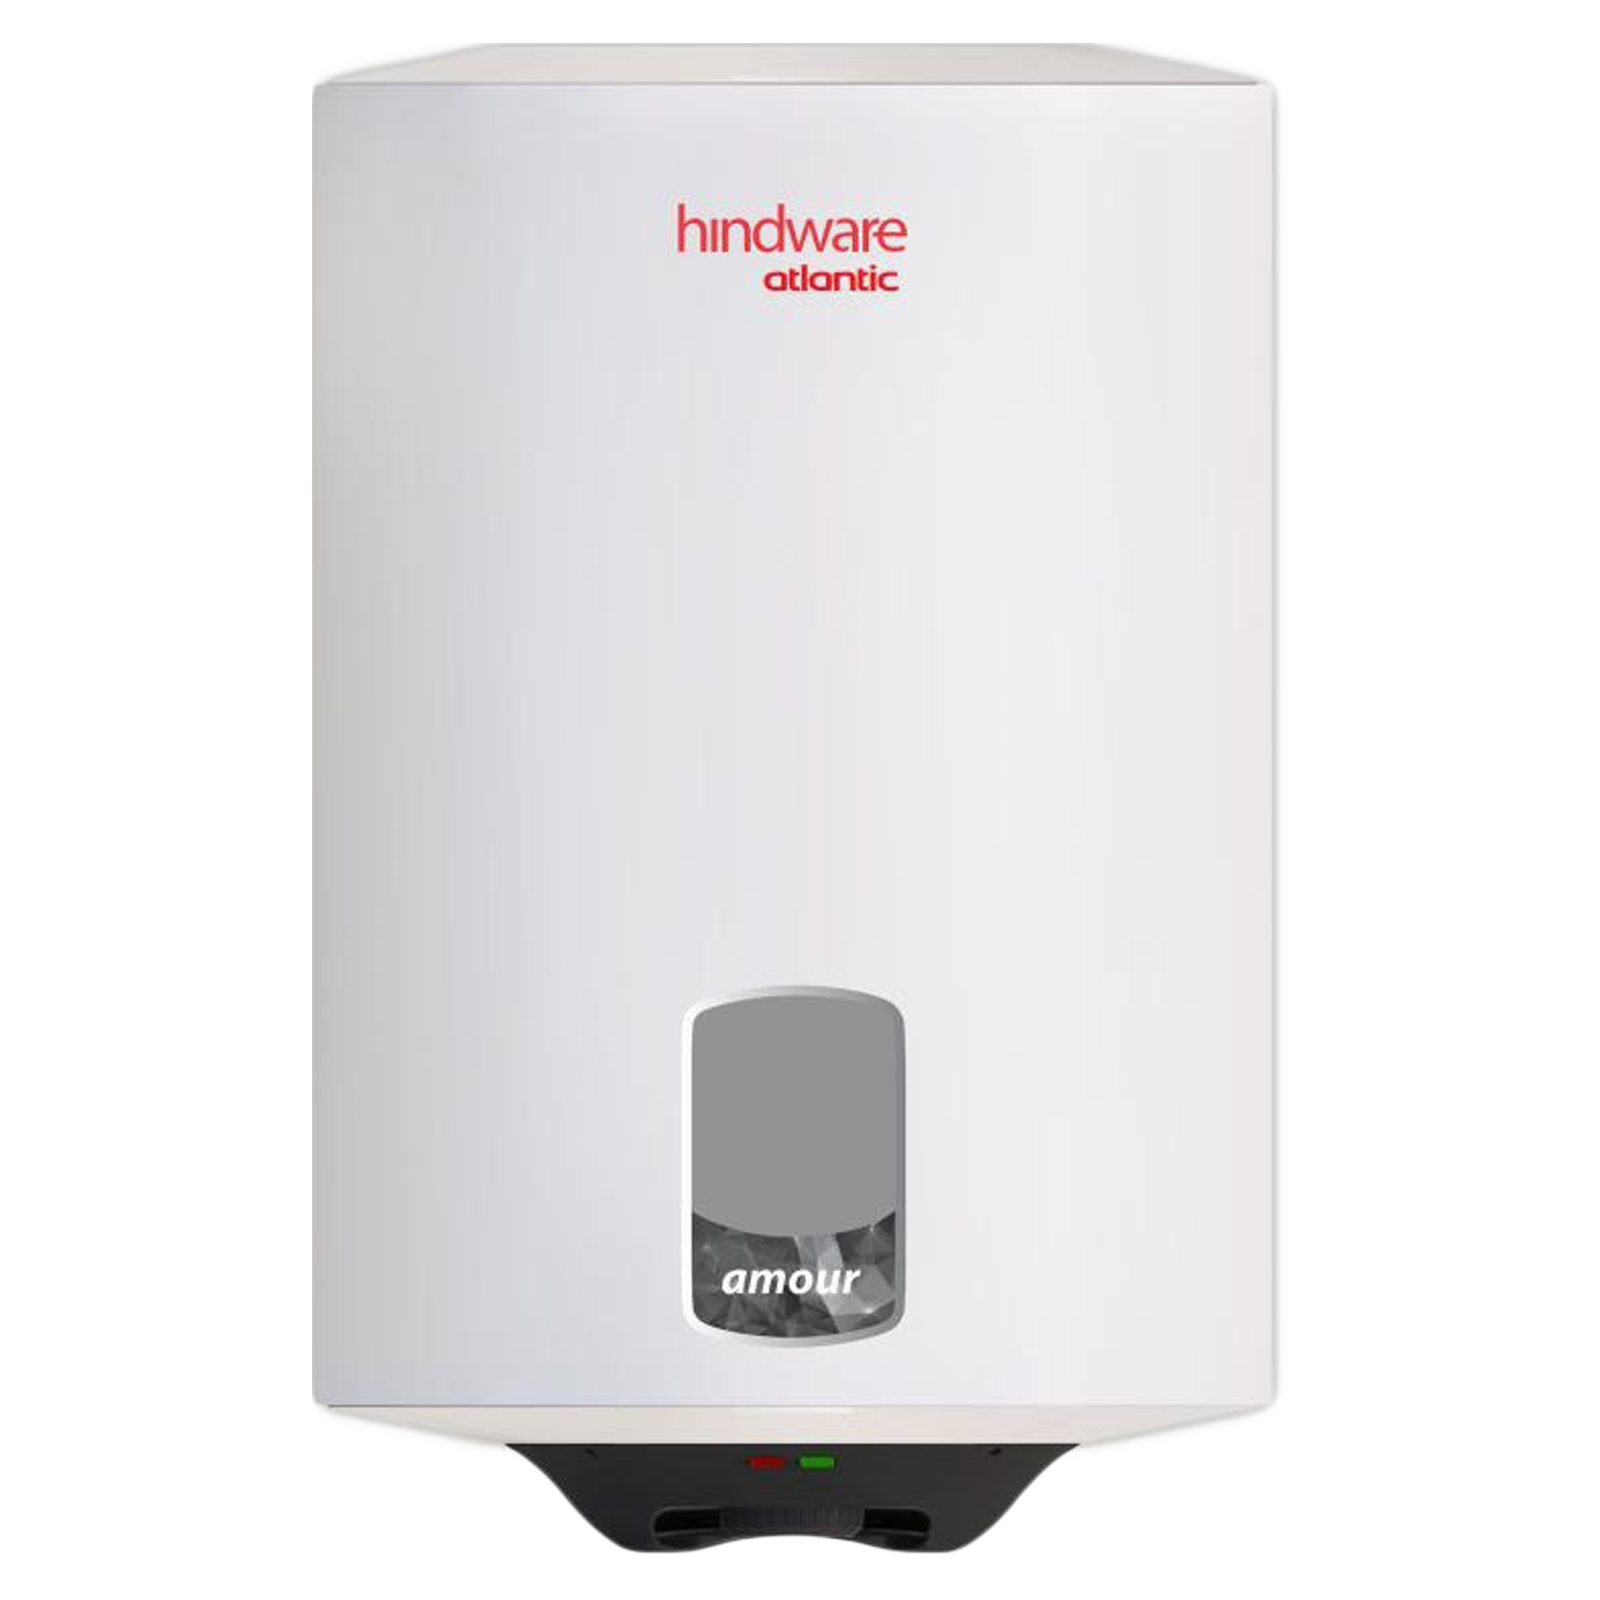 hindware Atlantic Amour 15 Litres 4 Star Storage Water Heater (2000 Watts, 519911, White)